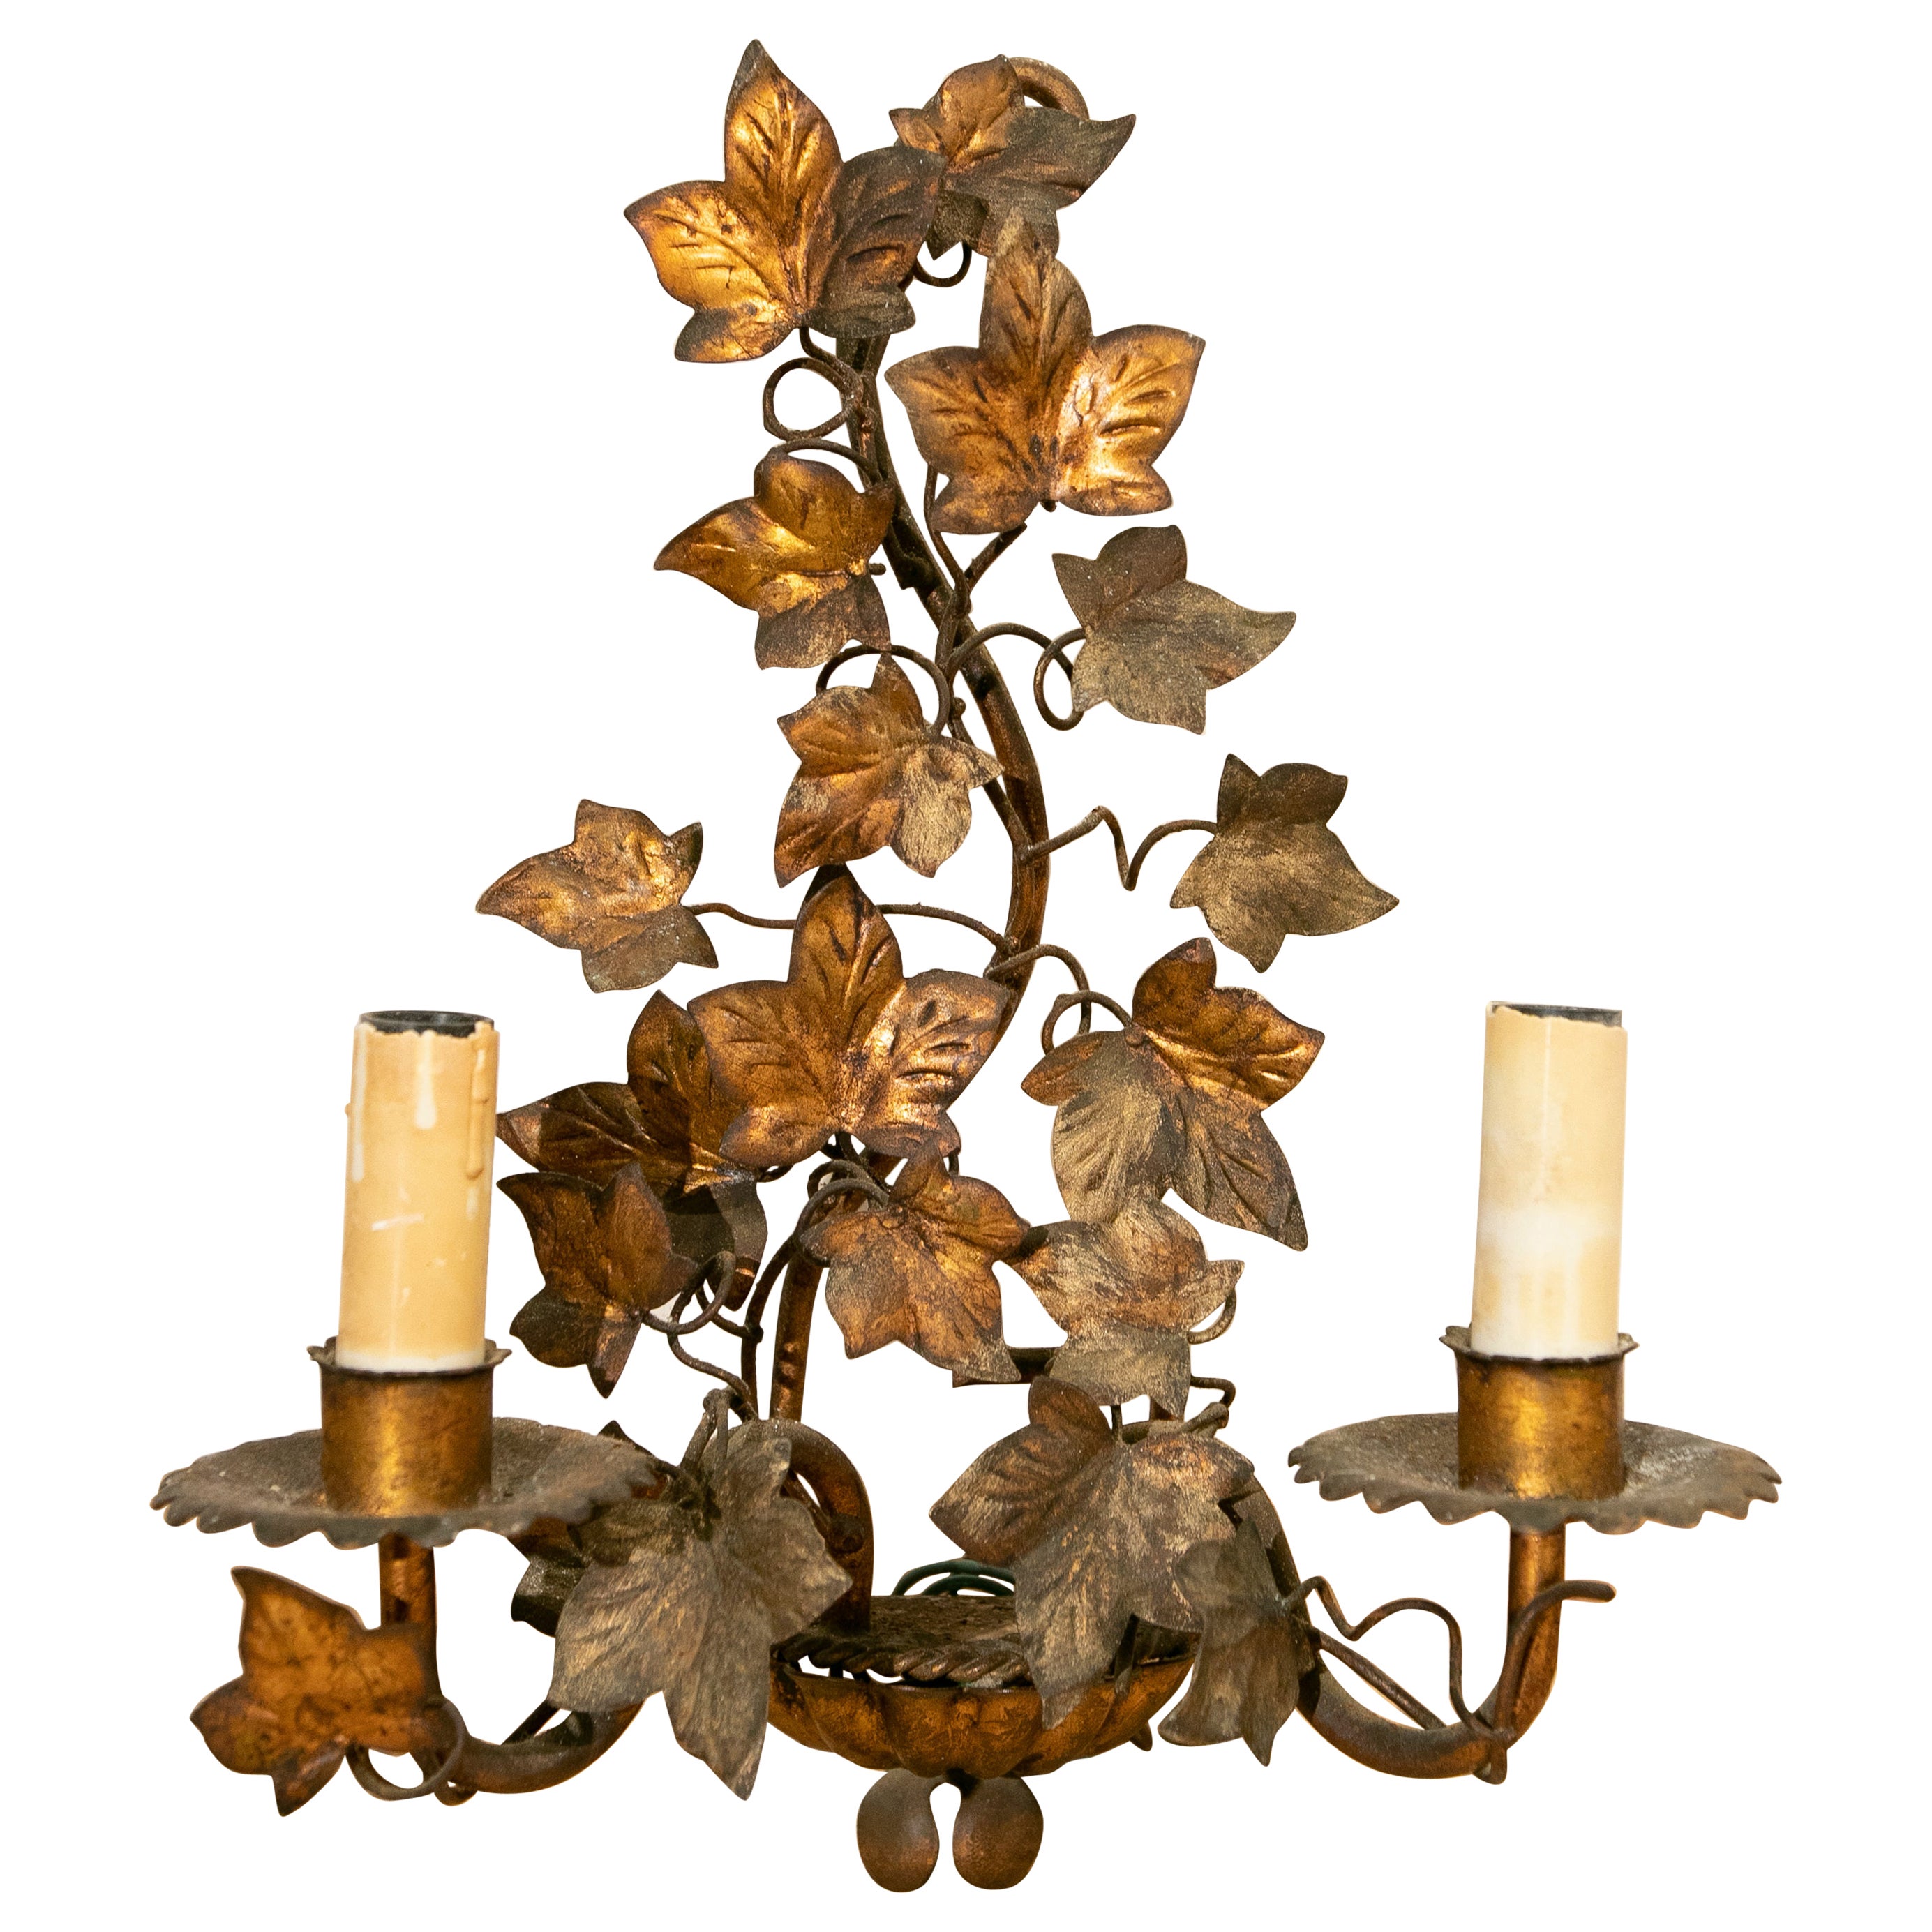 1970s Spanish Wall Lamp in Gilded Metal in the Shape of Branches and Leaves For Sale